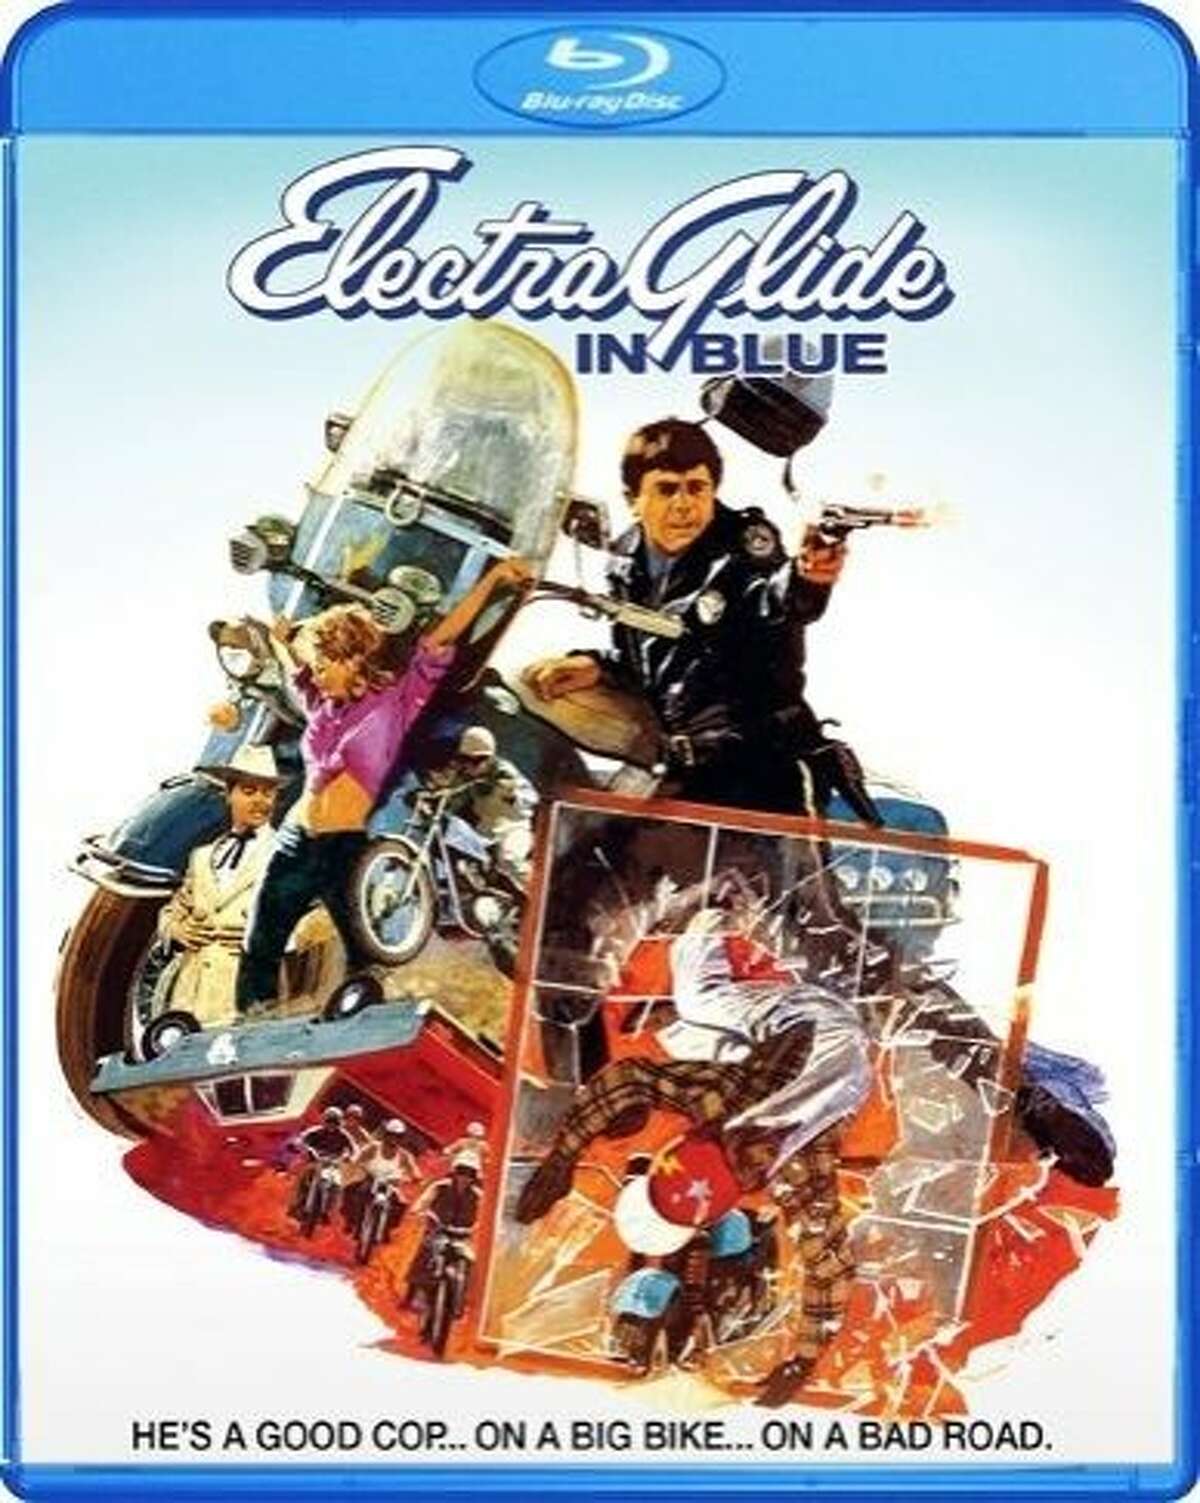 blu-ray cover: "Electra Glide in Blue"